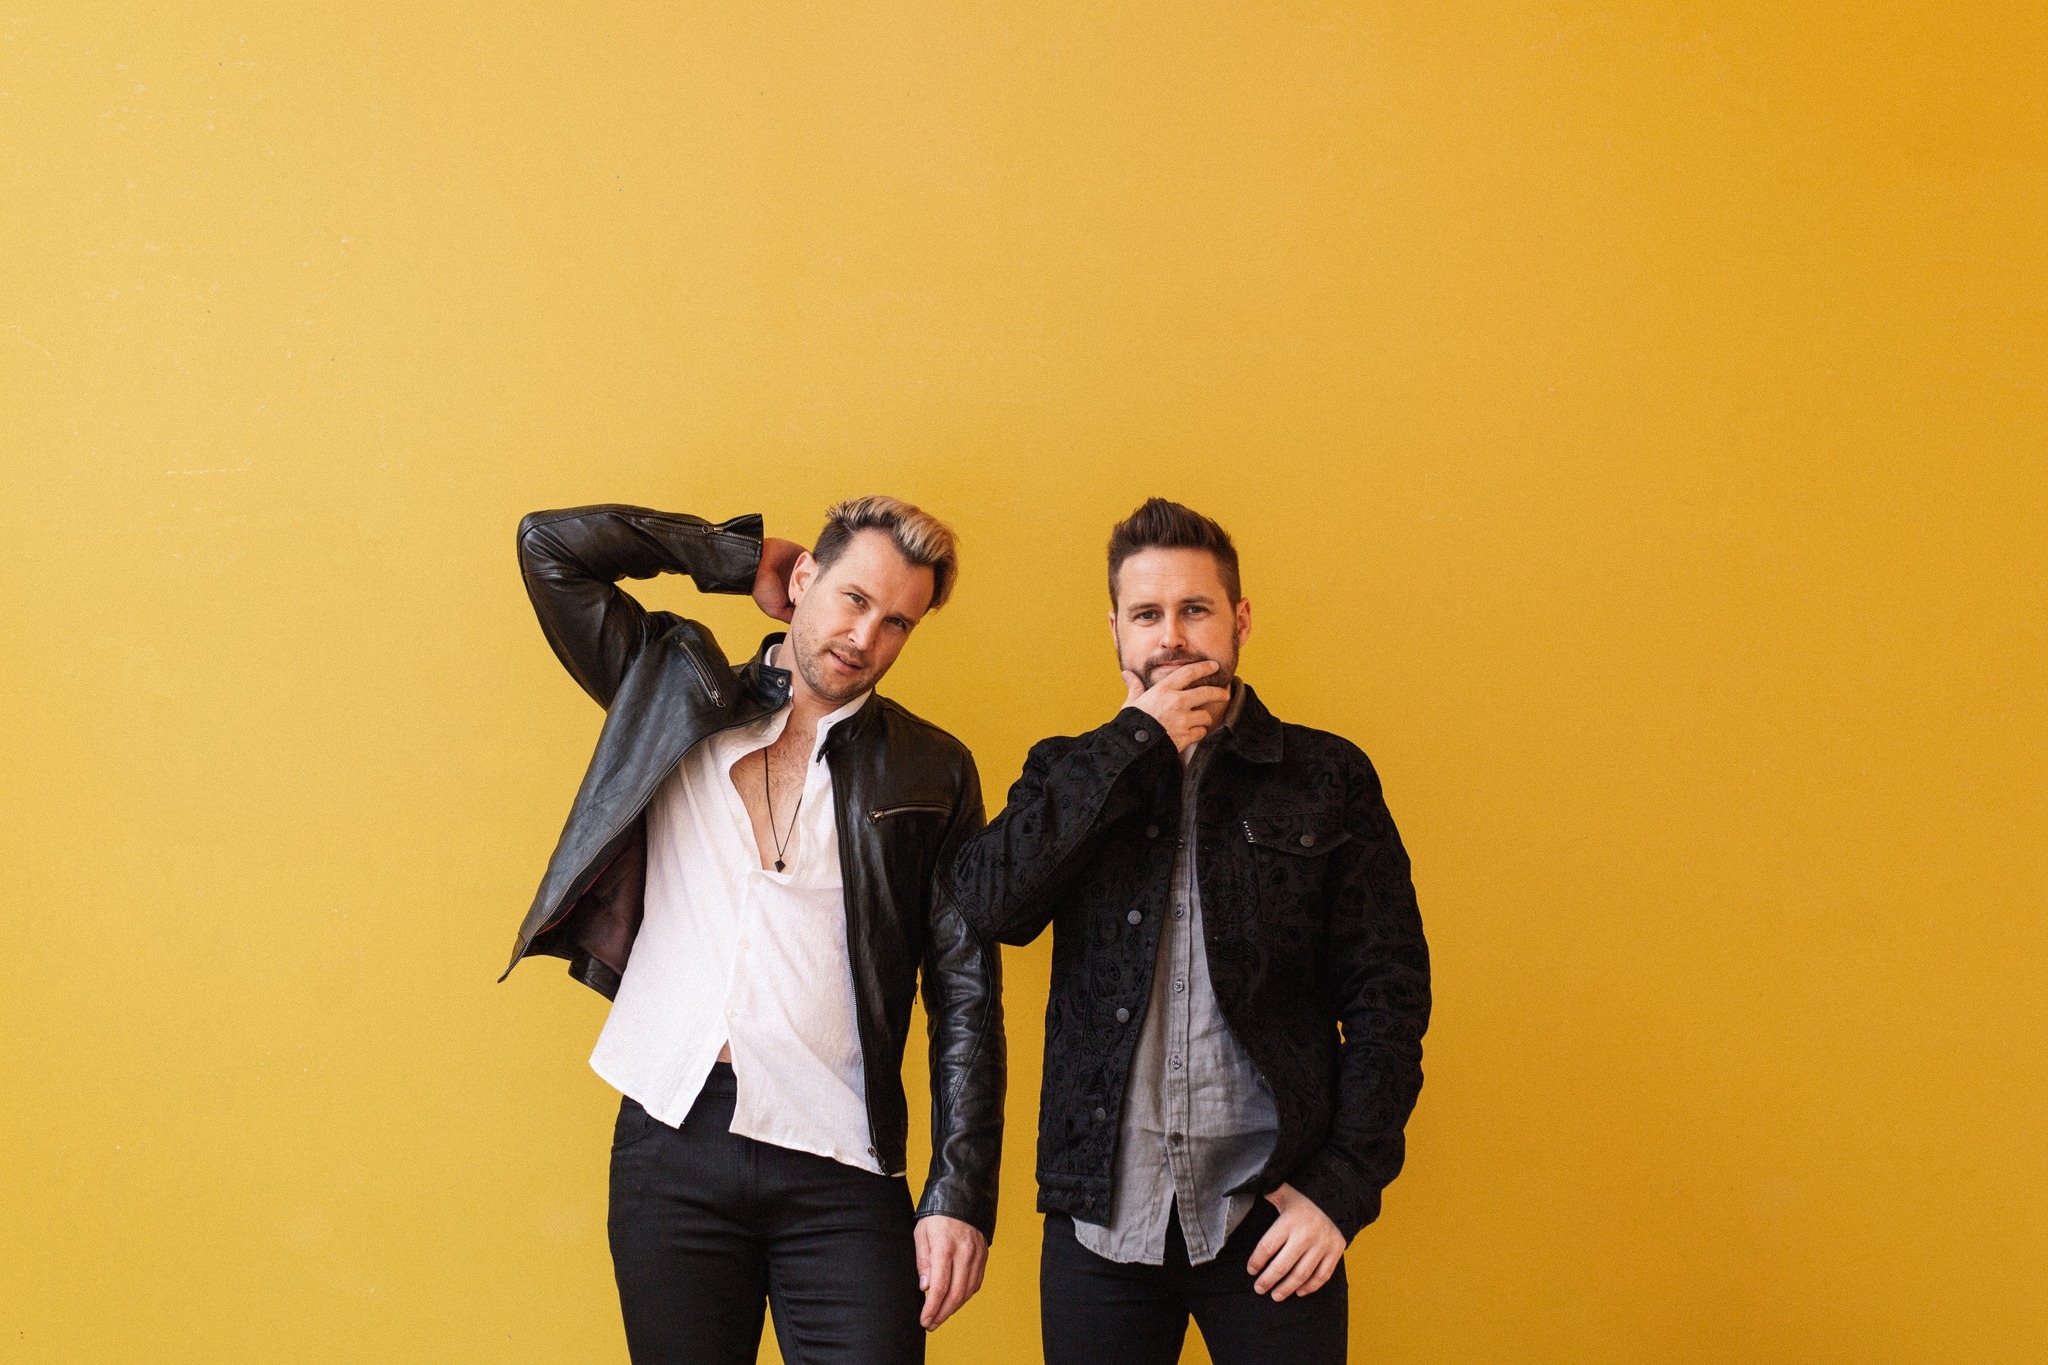 Two male music artists looking into the camera against an orange backdrop